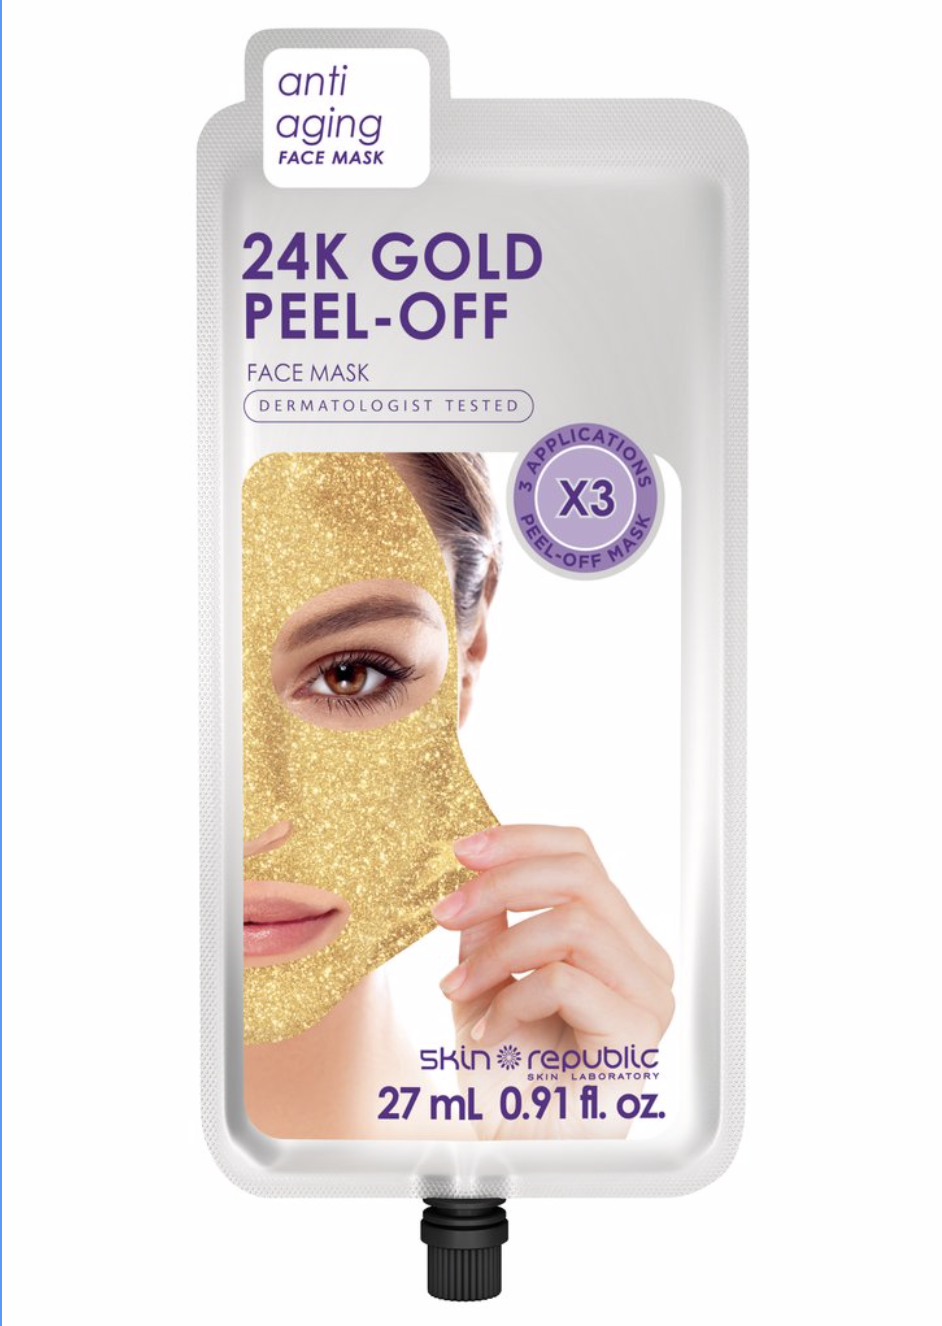 Is Gold The New Buzzword In Skincare? This £5.99 24K Gold Face Mask Says Yes